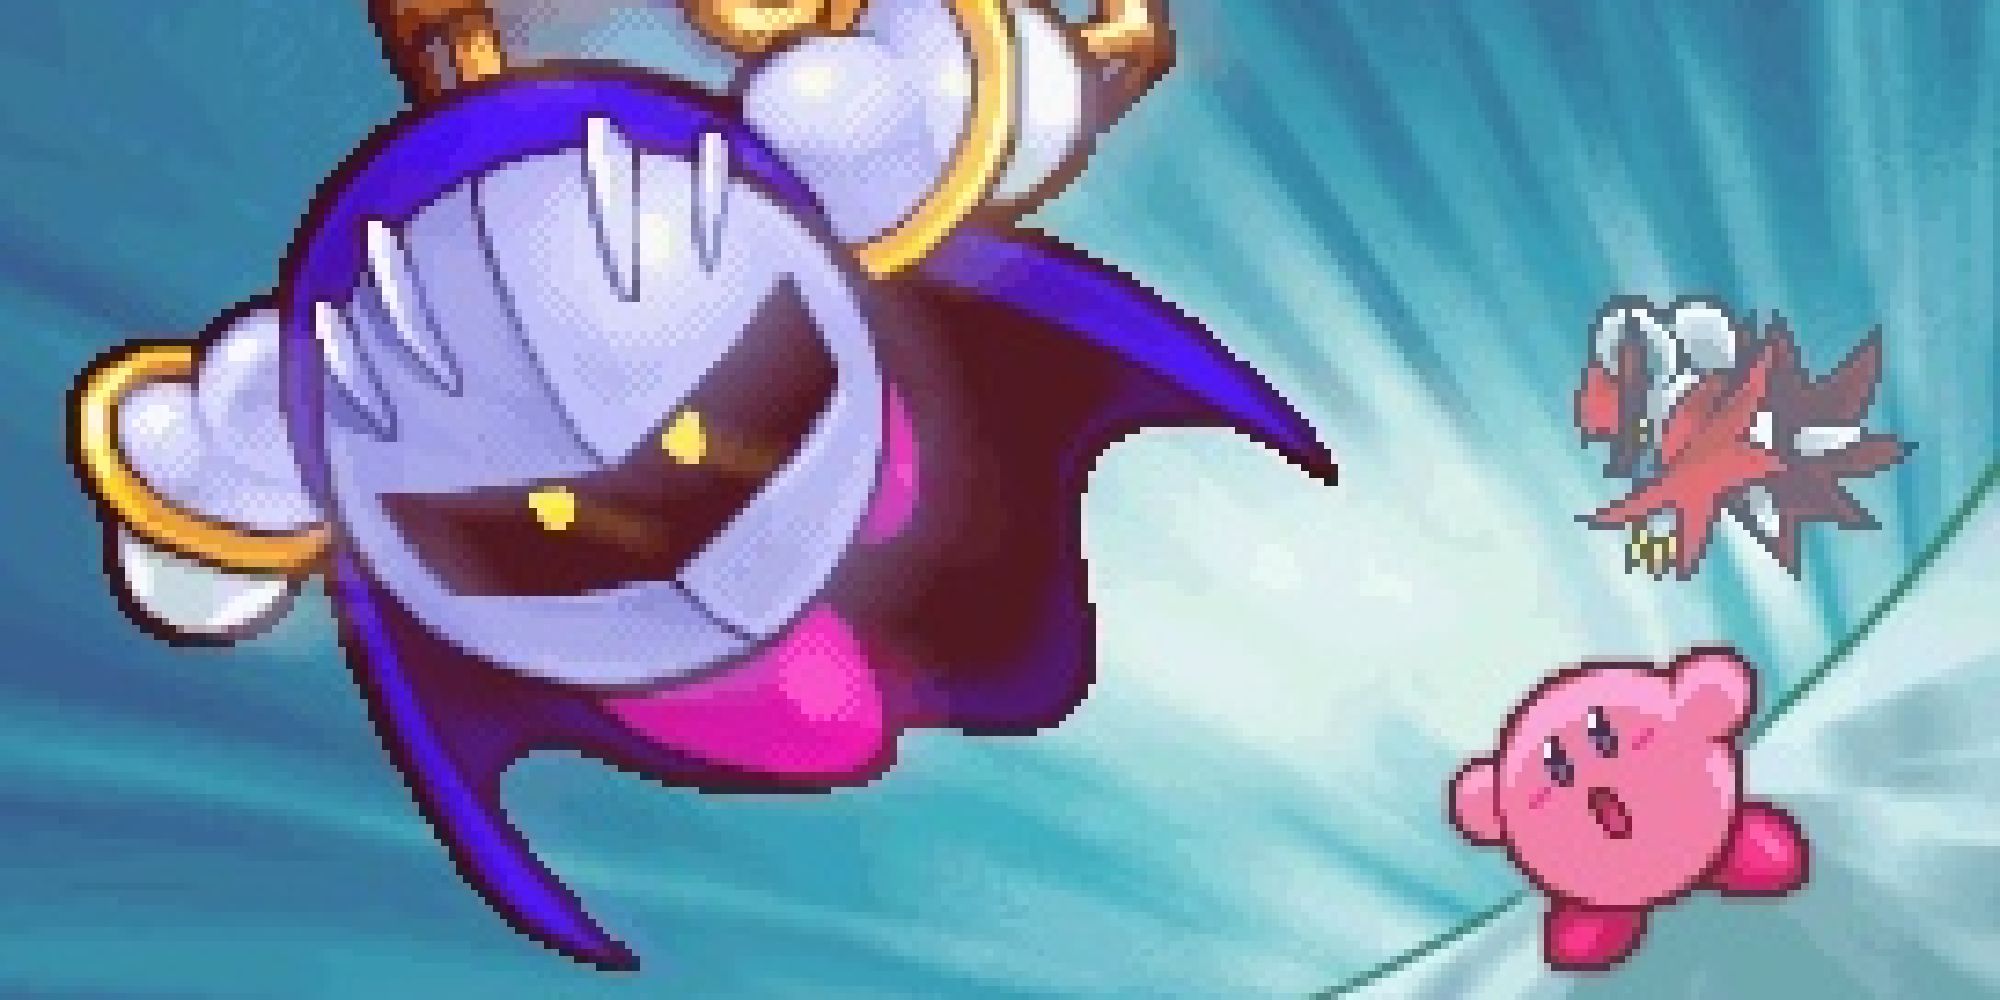 Meta Knight stealing a treasure chest from Kirby in a cinematic from Squeak squad